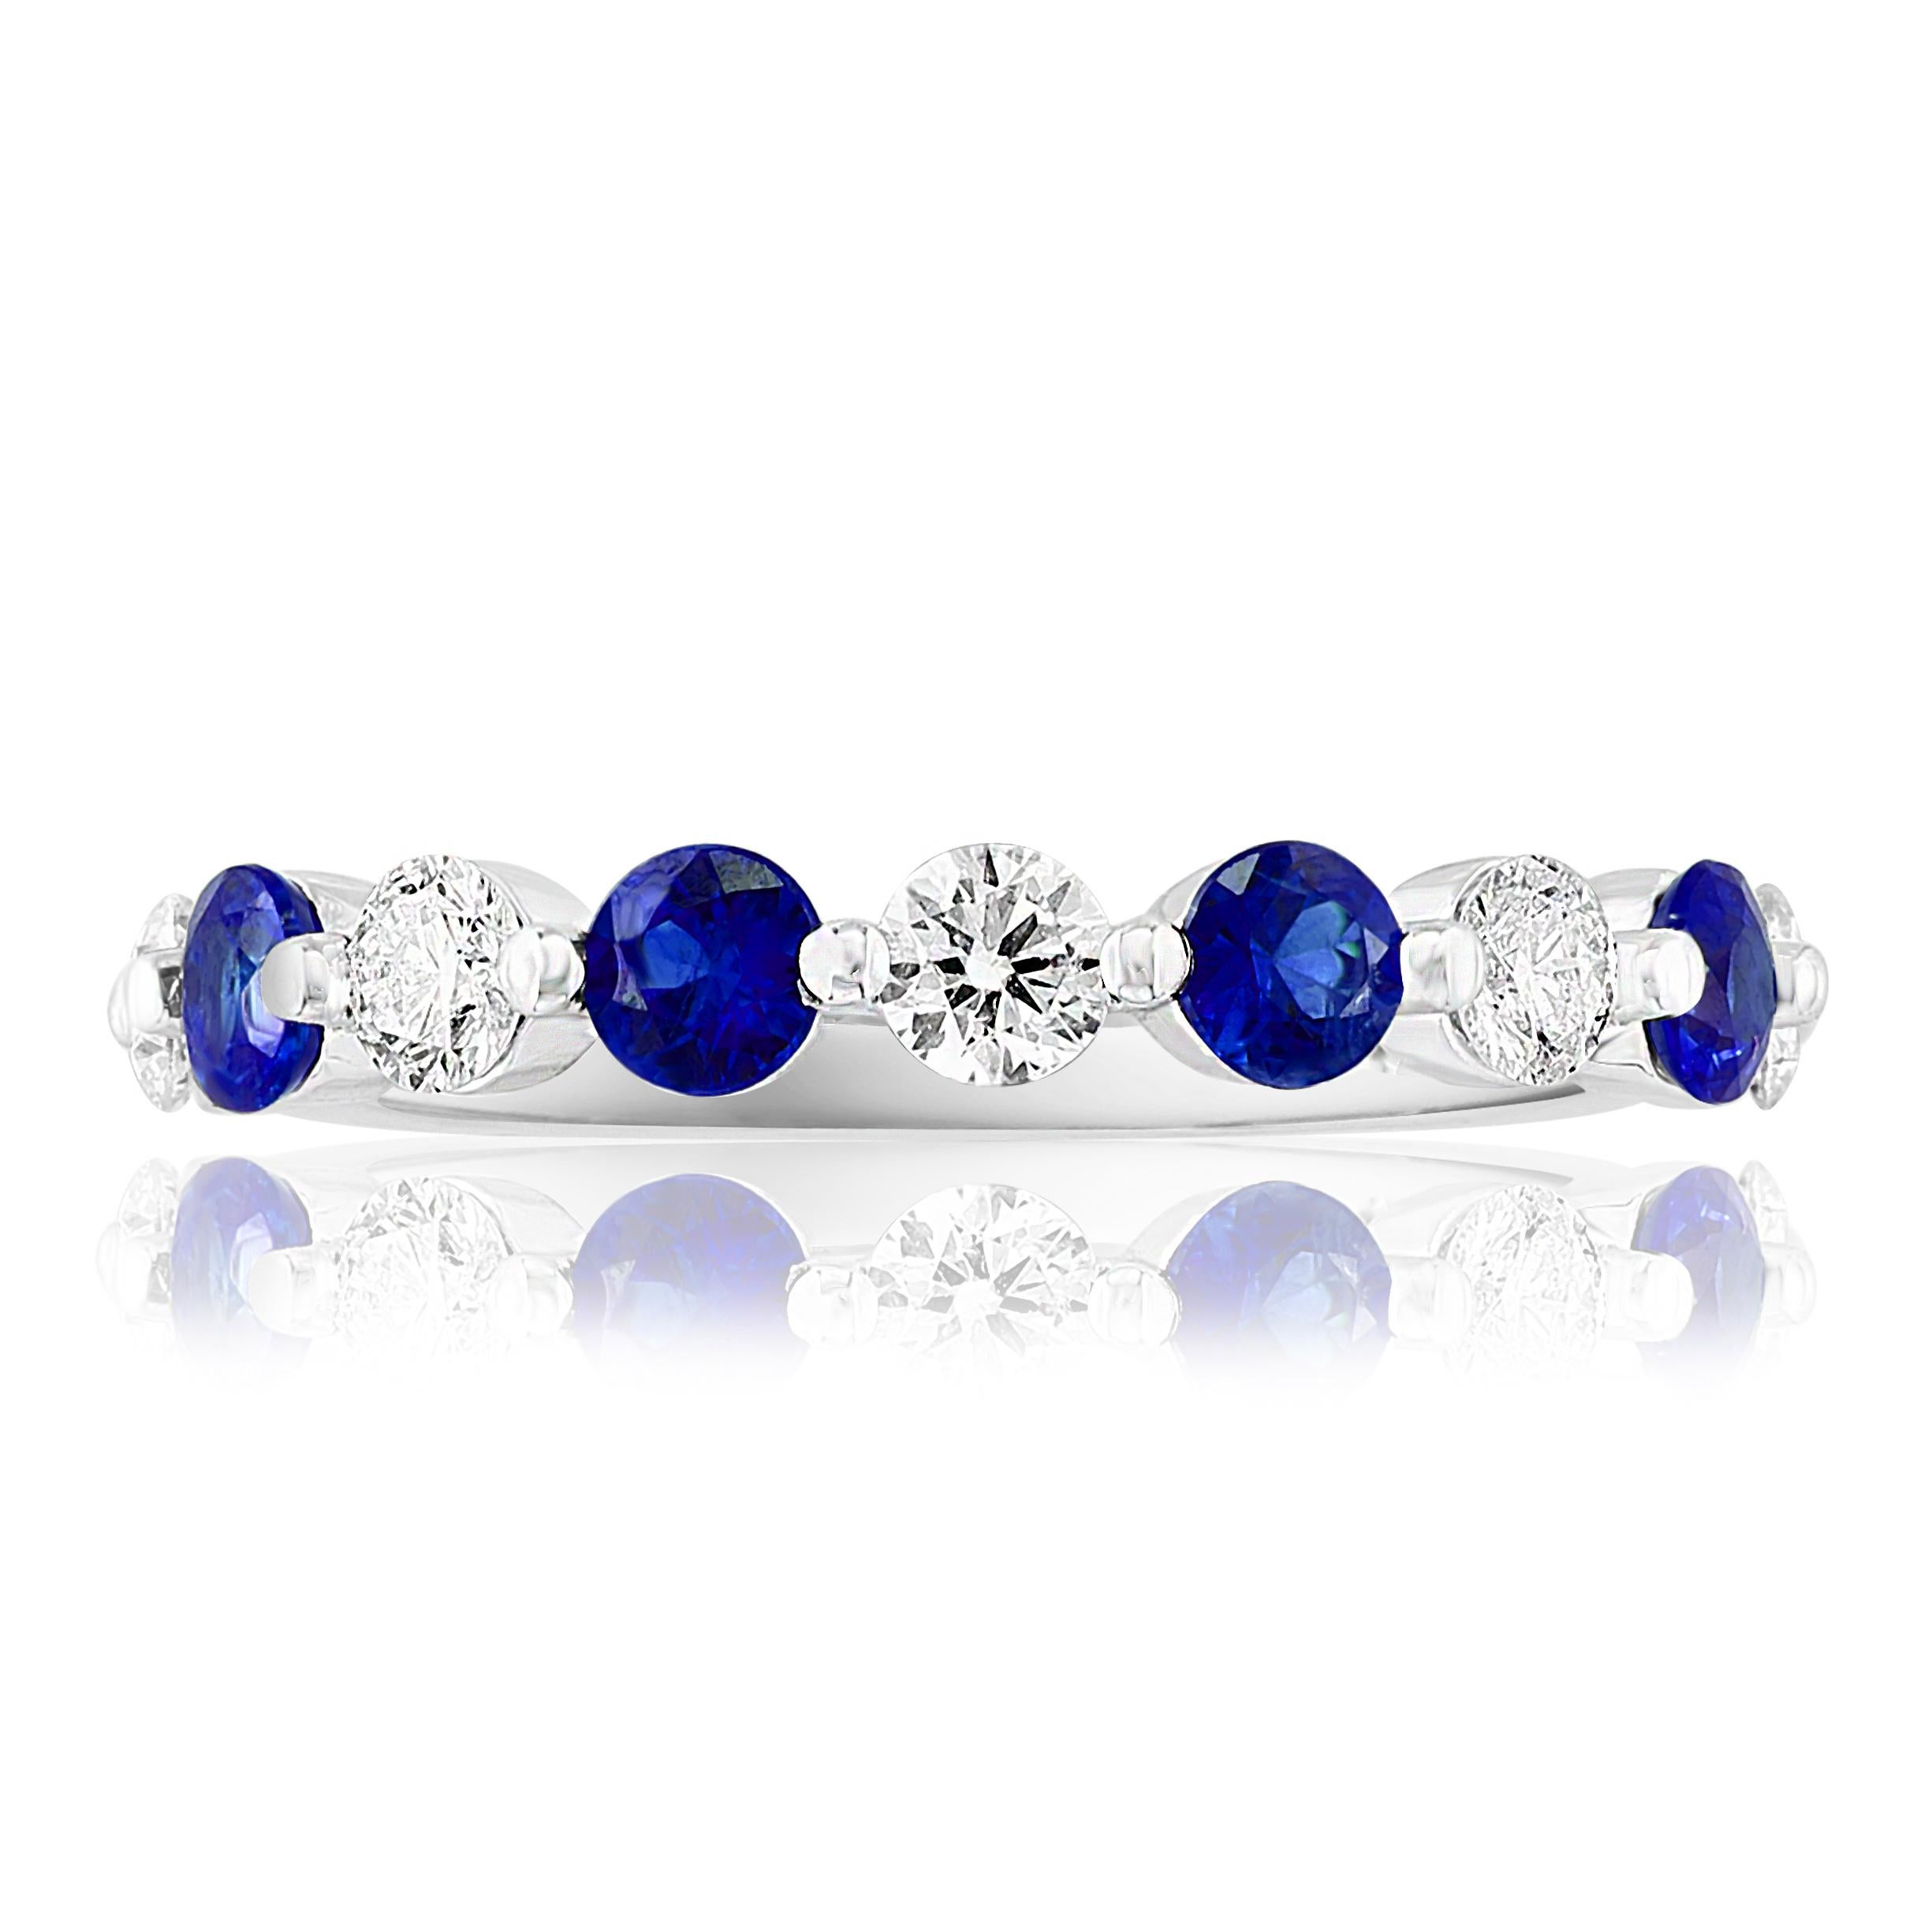 A fashionable and classic wedding band showcasing 5 brilliant cut diamonds weighing 0.50 carats total alternating with 4 round blue sapphires weighing 0.40 carats. Stones secured with a shared prong setting made with 14K white gold. A versatile